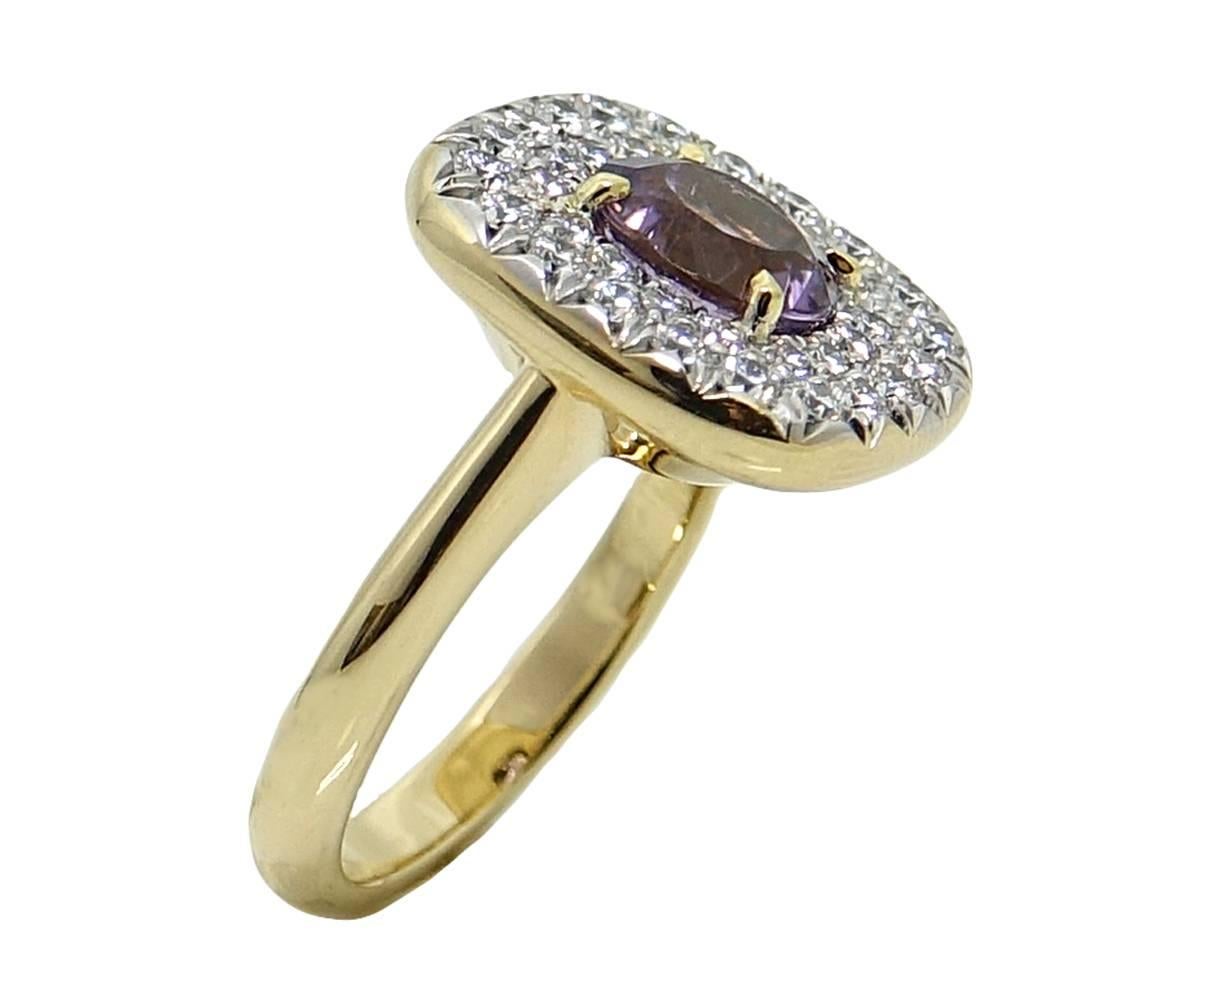 This Sparkling 18K Yellow Gold Ring Has An Eye Catching Round Lilac Tourmaline Stone Weighing A Total Carat Weight Of 1.83 Carats. Diamonds Surround The Tourmaline and Weigh A Total Carat Weight Of .92 Carats. This Lovely Ring Is A Size 6.